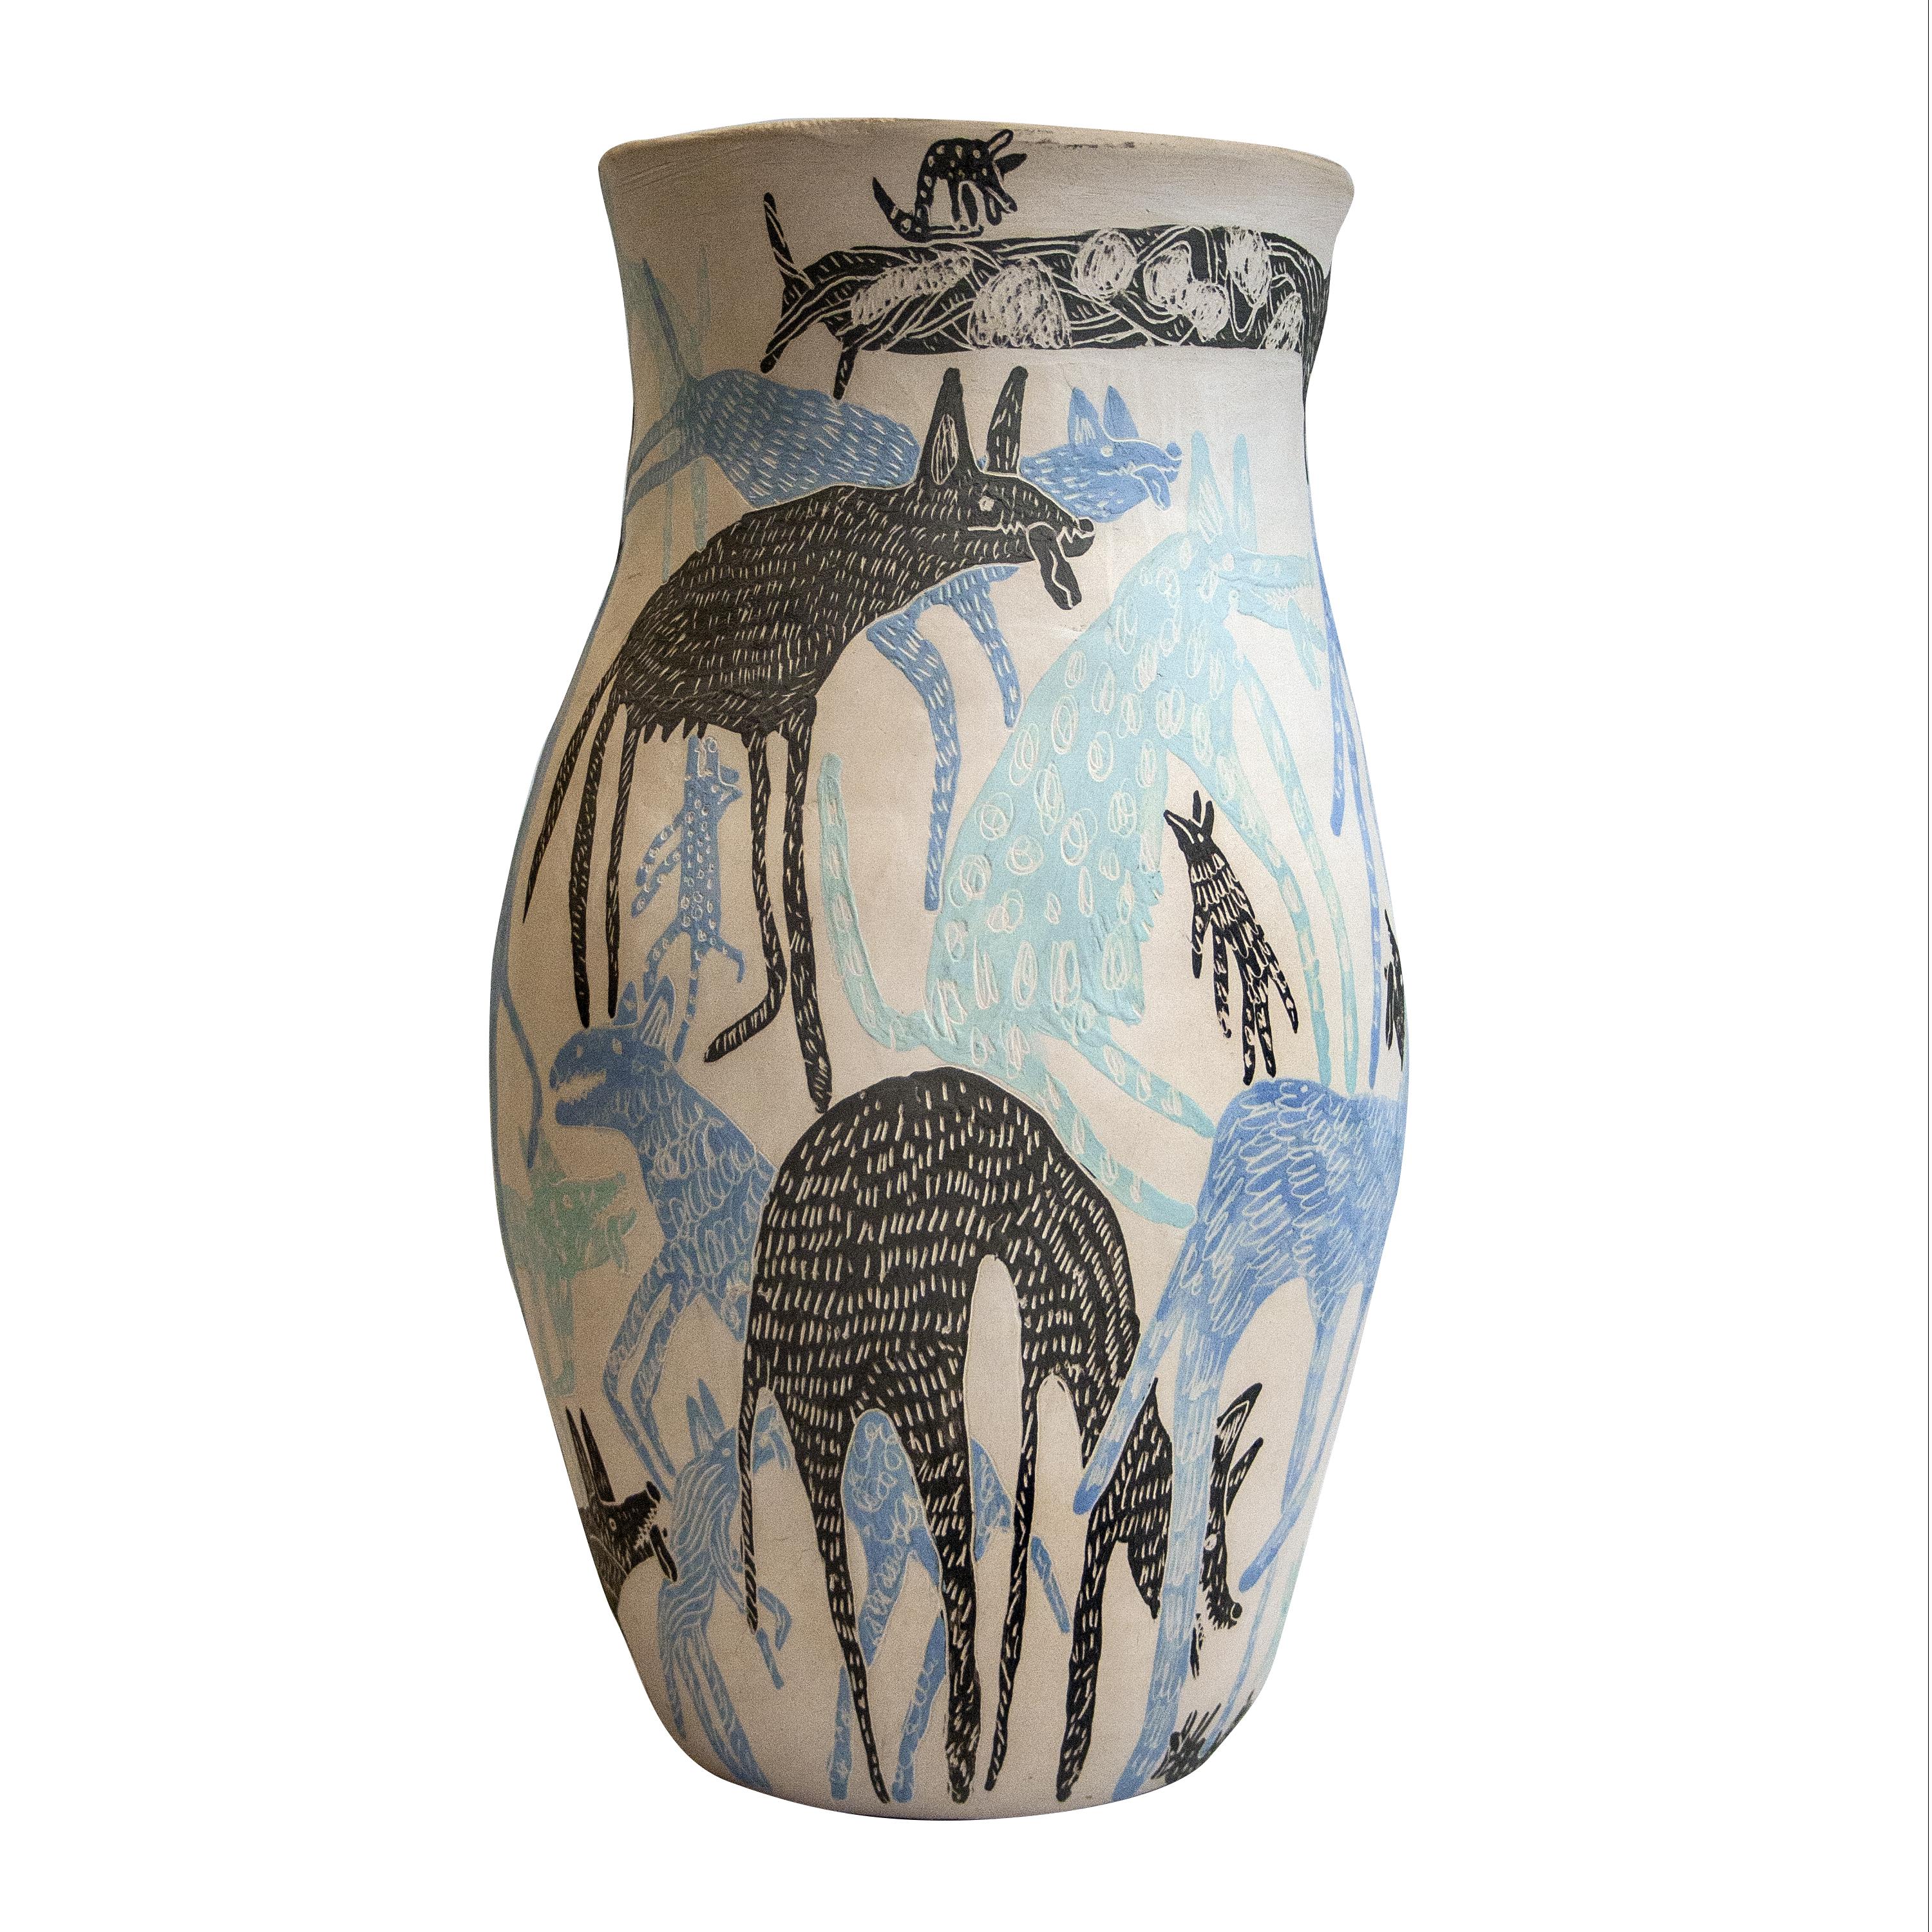 This handmade vase was designed and made by the collaboration of Spanish designers Carlos Jiménez, better known as `“Del Amor y la Belleza”´´, and Ranma.
The vase is made of ceramic at low temperatures and illustrated with animal motifs using the